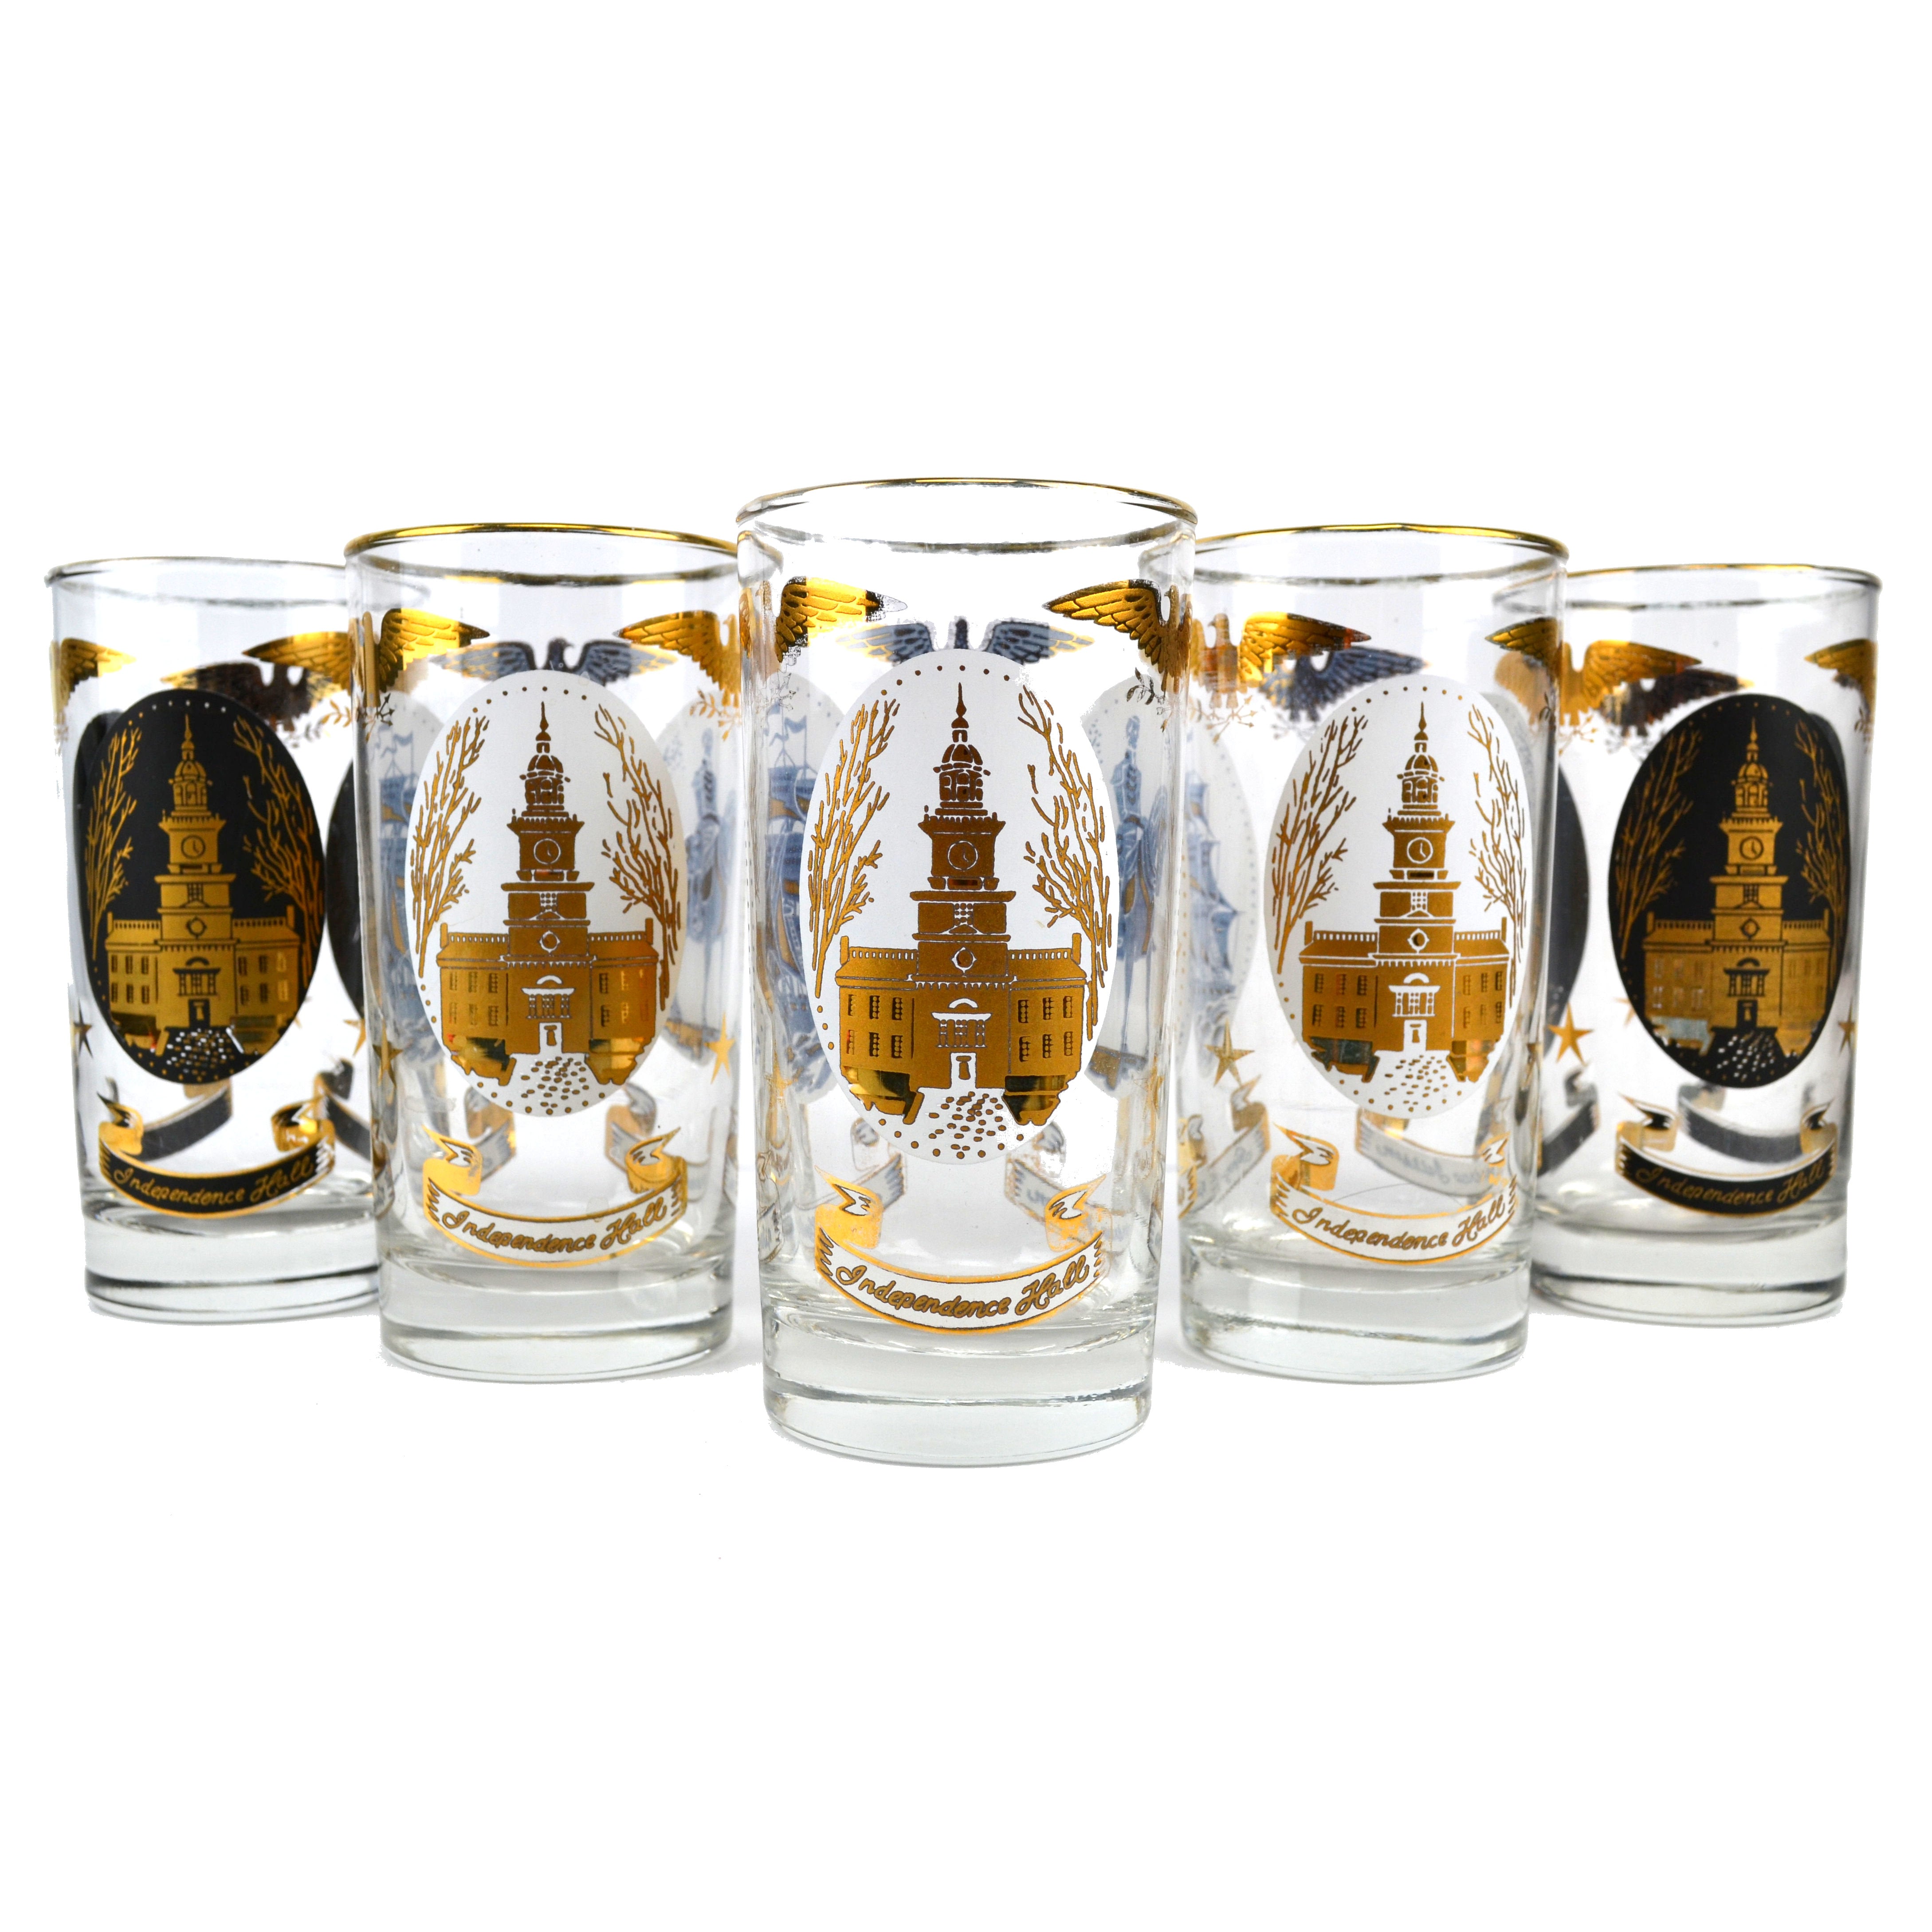 60 vintage Libbey drinking glass designs from the 60s - Click Americana